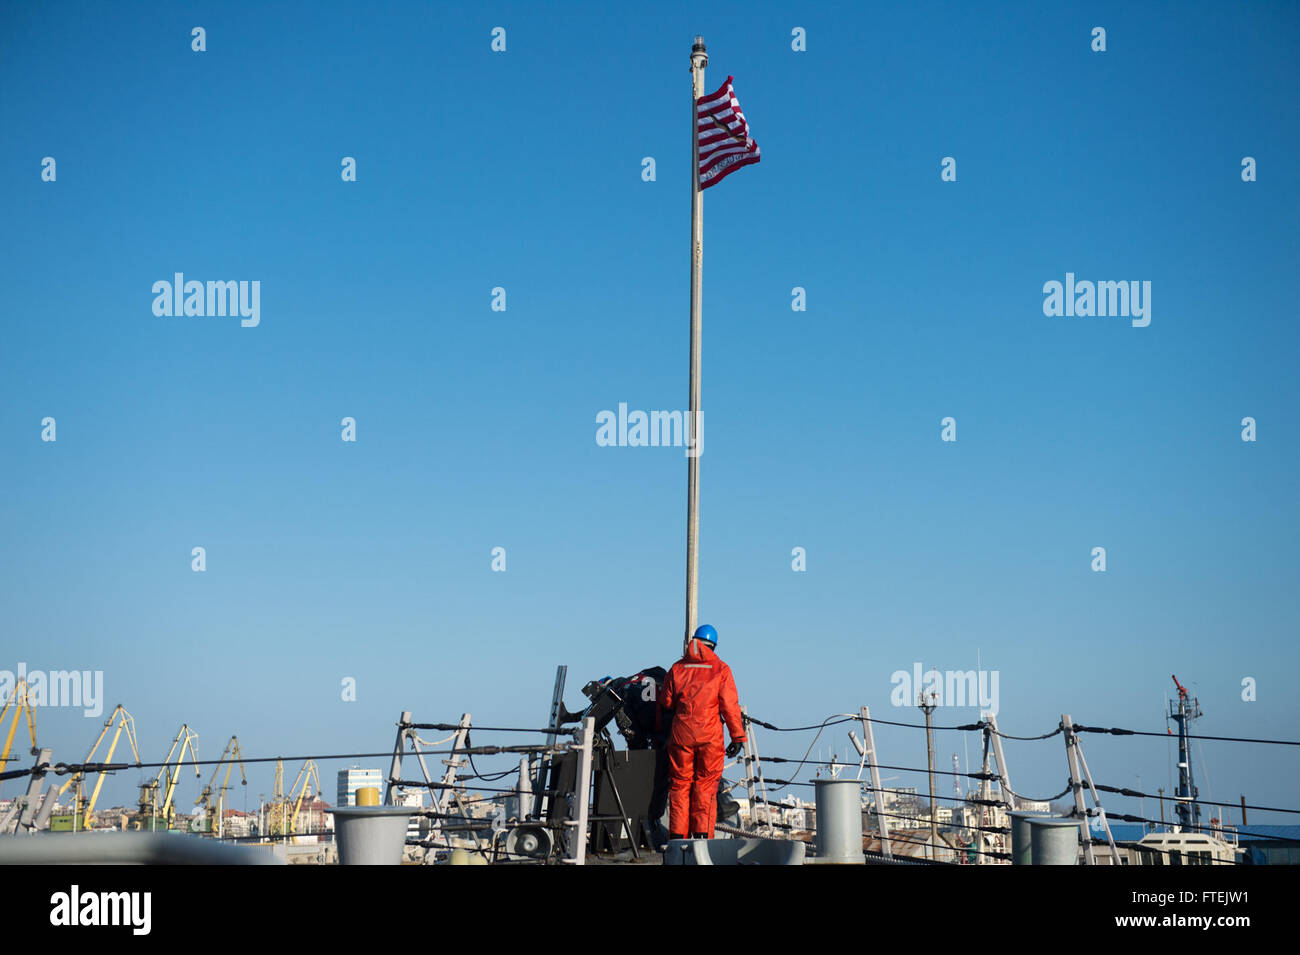 CONSTANTA, Romania (Dec. 30, 2014) Sailors raise the Union Jack flag as USS Donald Cook (DDG 75) arrives at Constanta, Romania for a scheduled port visit Dec. 30, 2014. Donald Cook, an Arleigh Burke-class guided-missile destroyer, forward-deployed to Rota, Spain, is conducting naval operations in the U.S. 6th Fleet area of operations in support of U.S. national security interests in Europe. Stock Photo